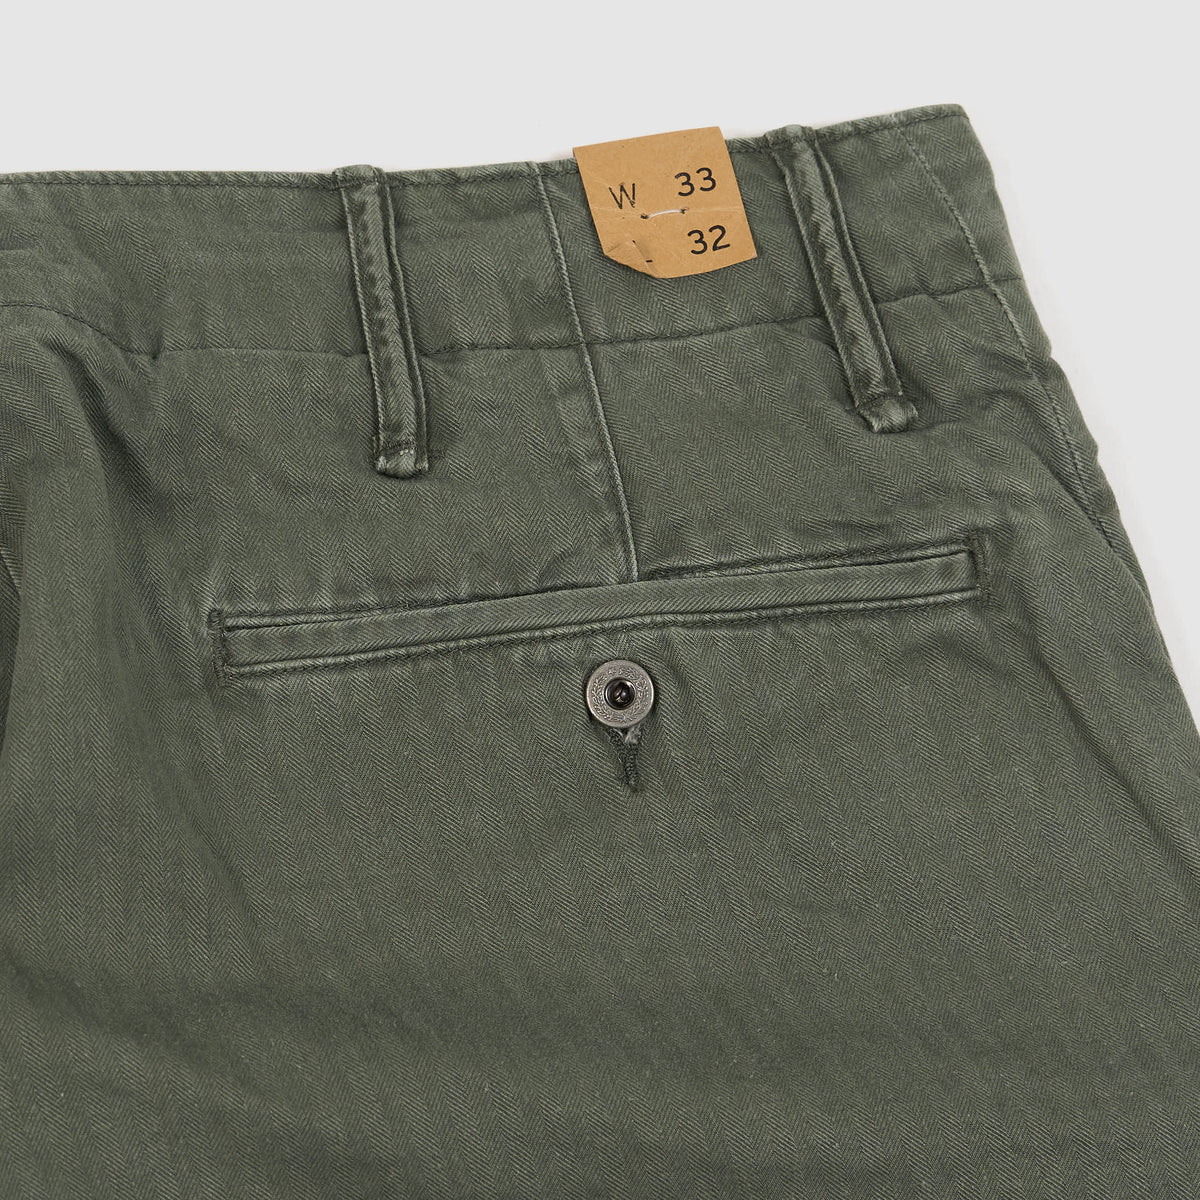 Double RL Officers Classic Straight Leg Chino Pants